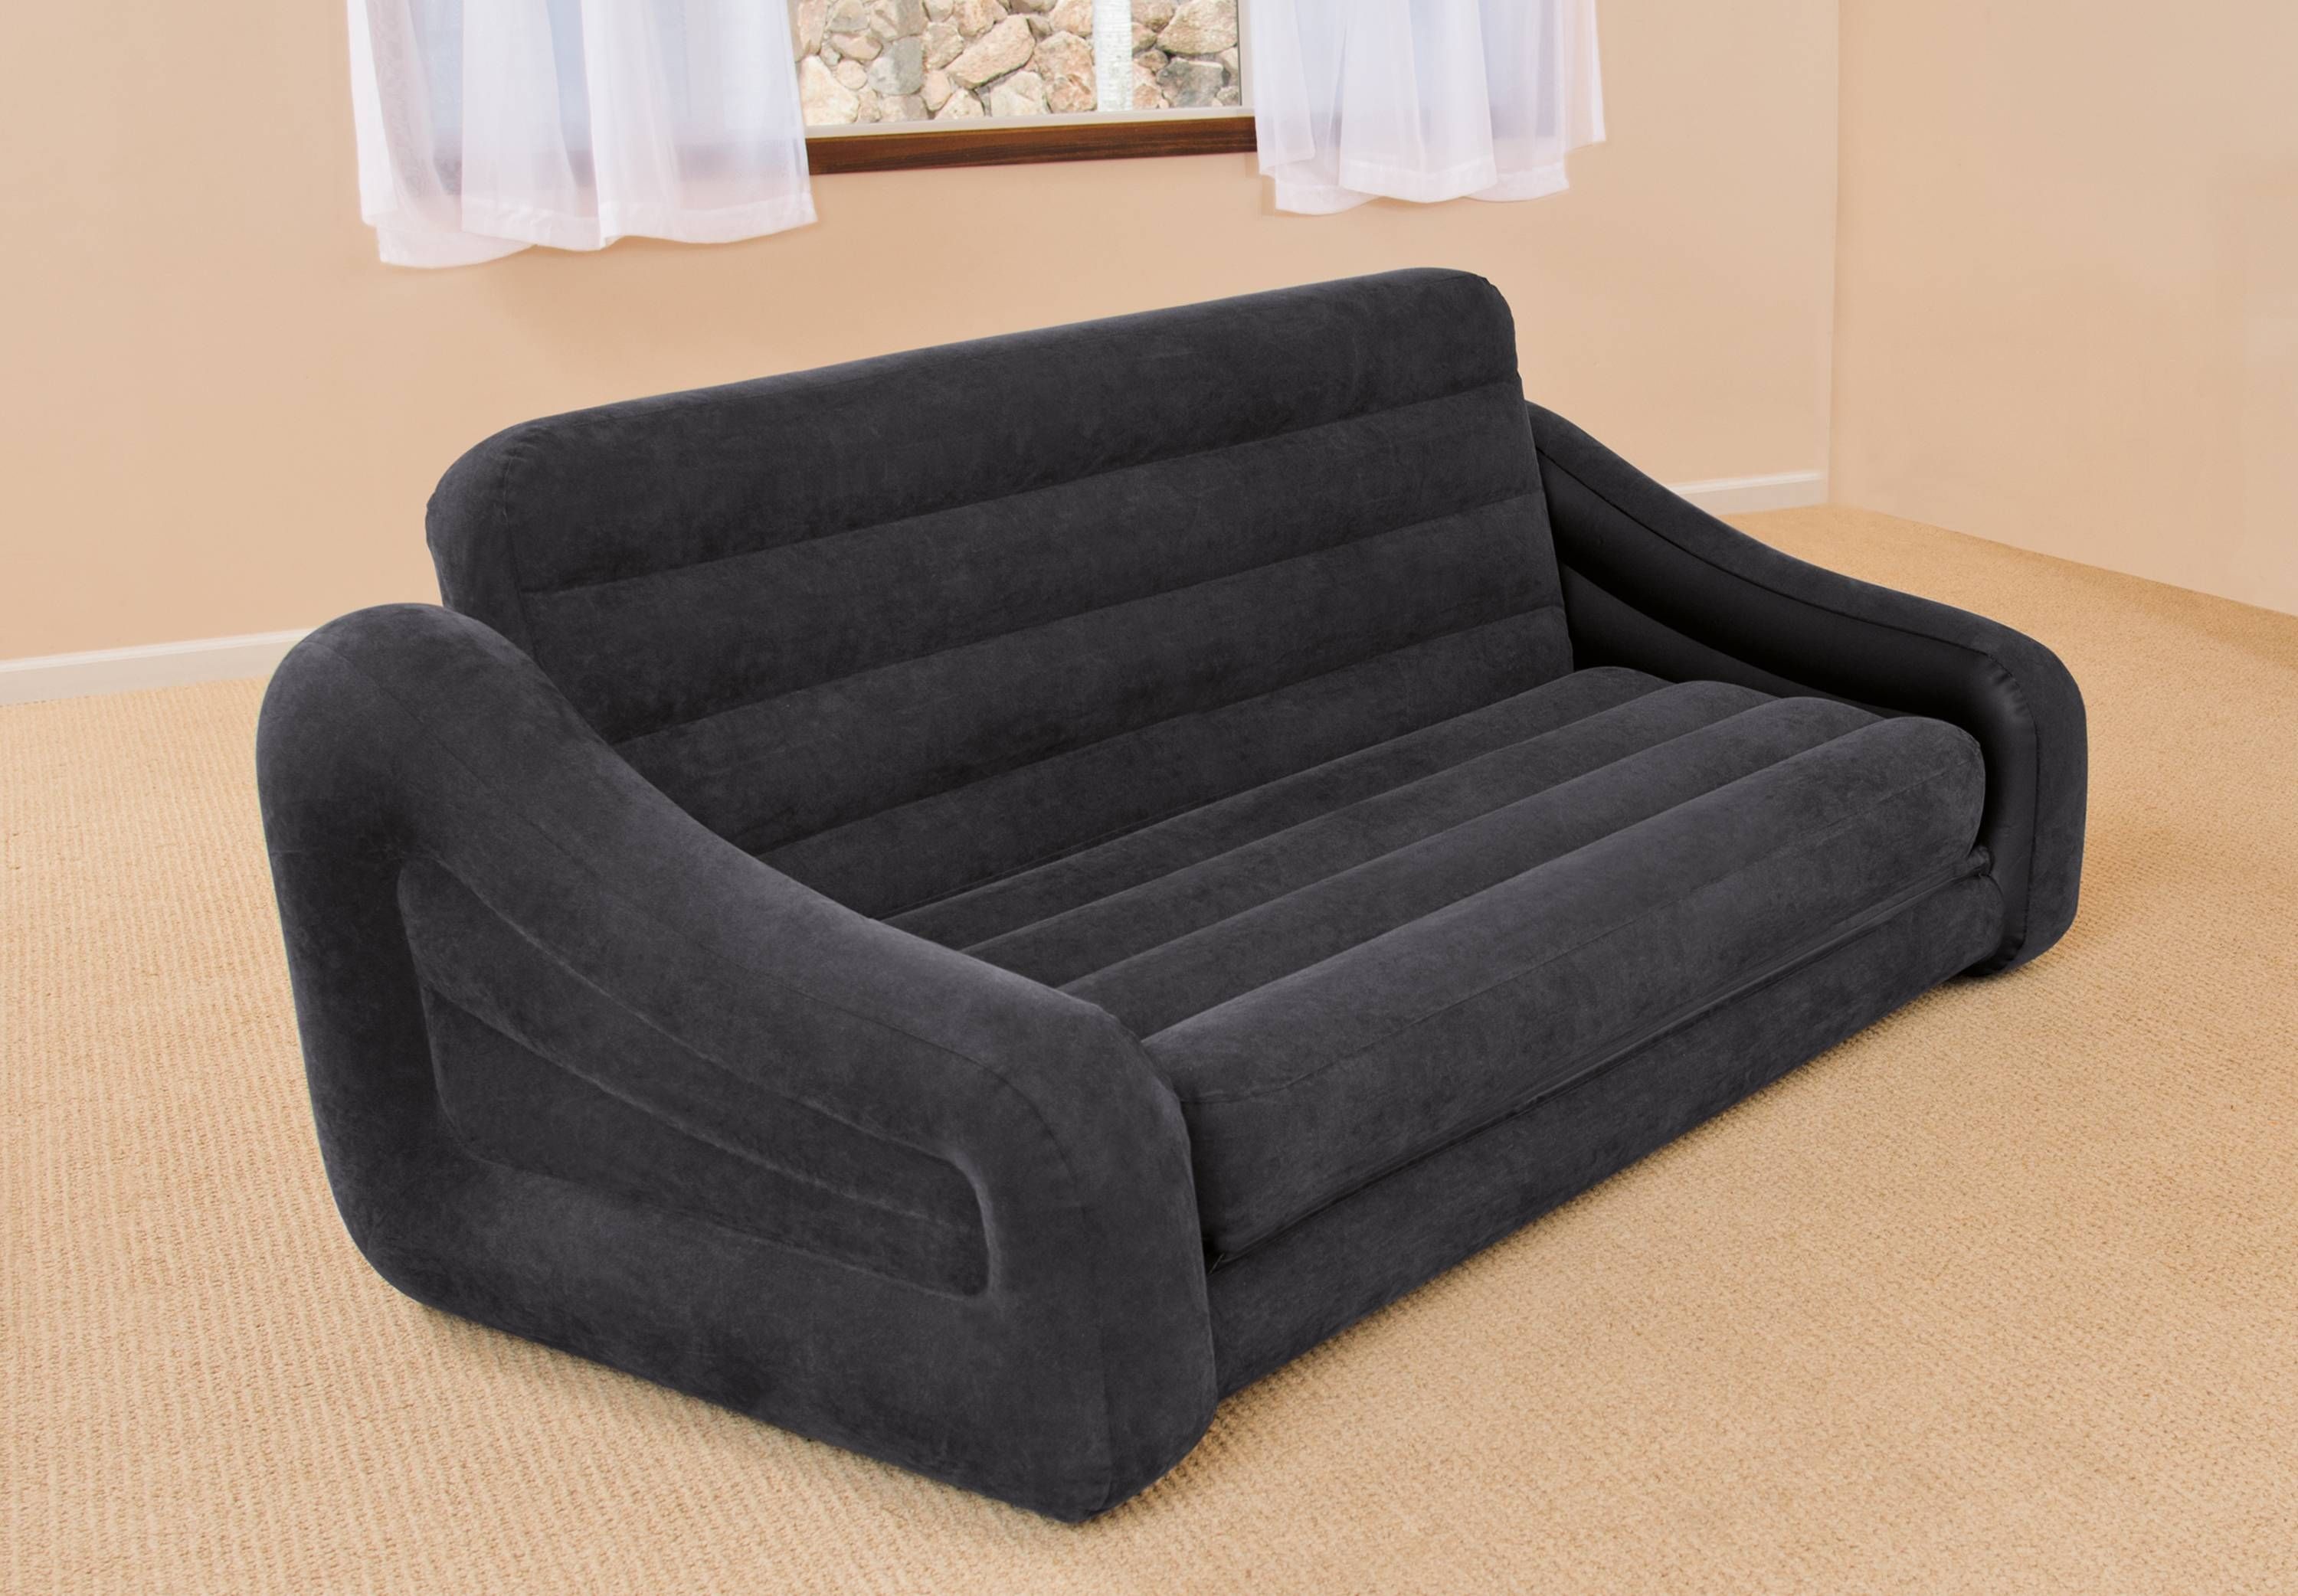 pull out queen size sofa bed matress